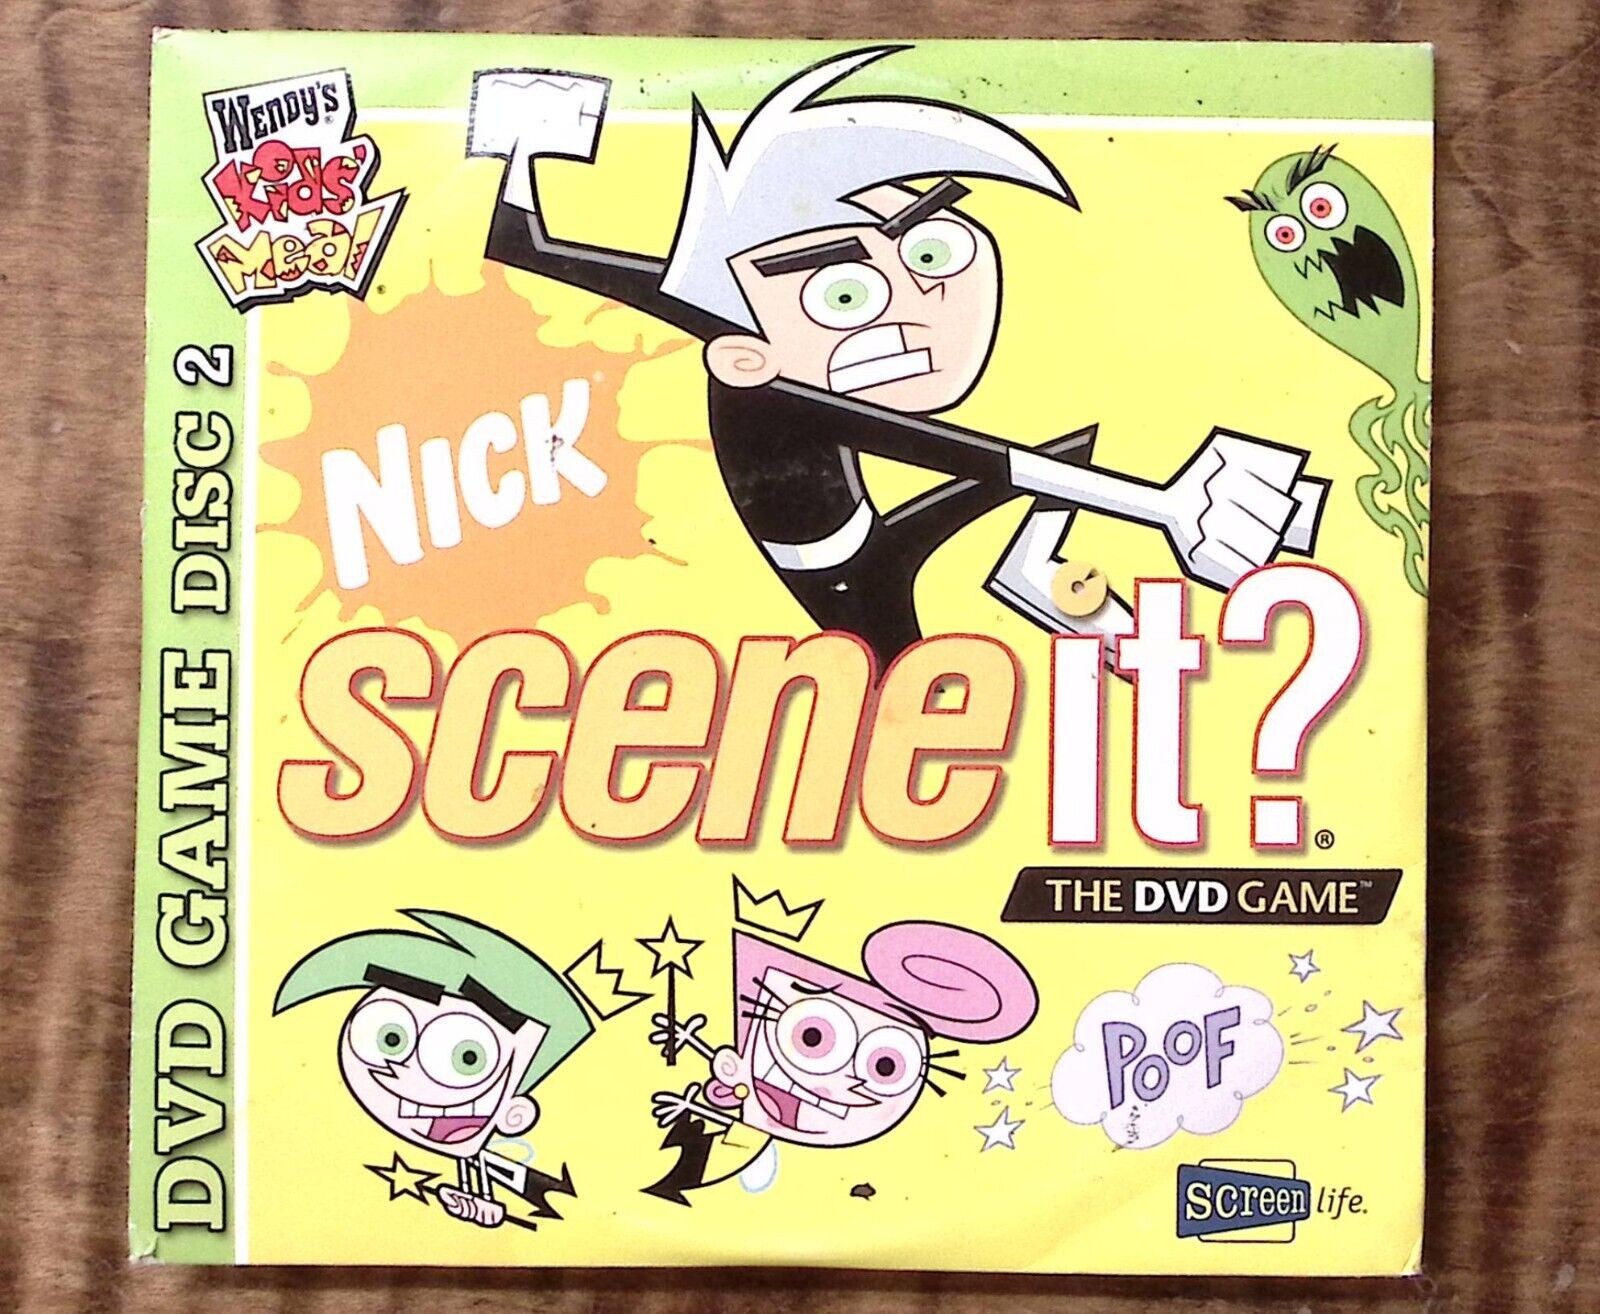 WENDY\'S KIDS MEAL NICK SCENE IT? THE DVD GAME DISC 2 SCREEN LIFE  CD 3803